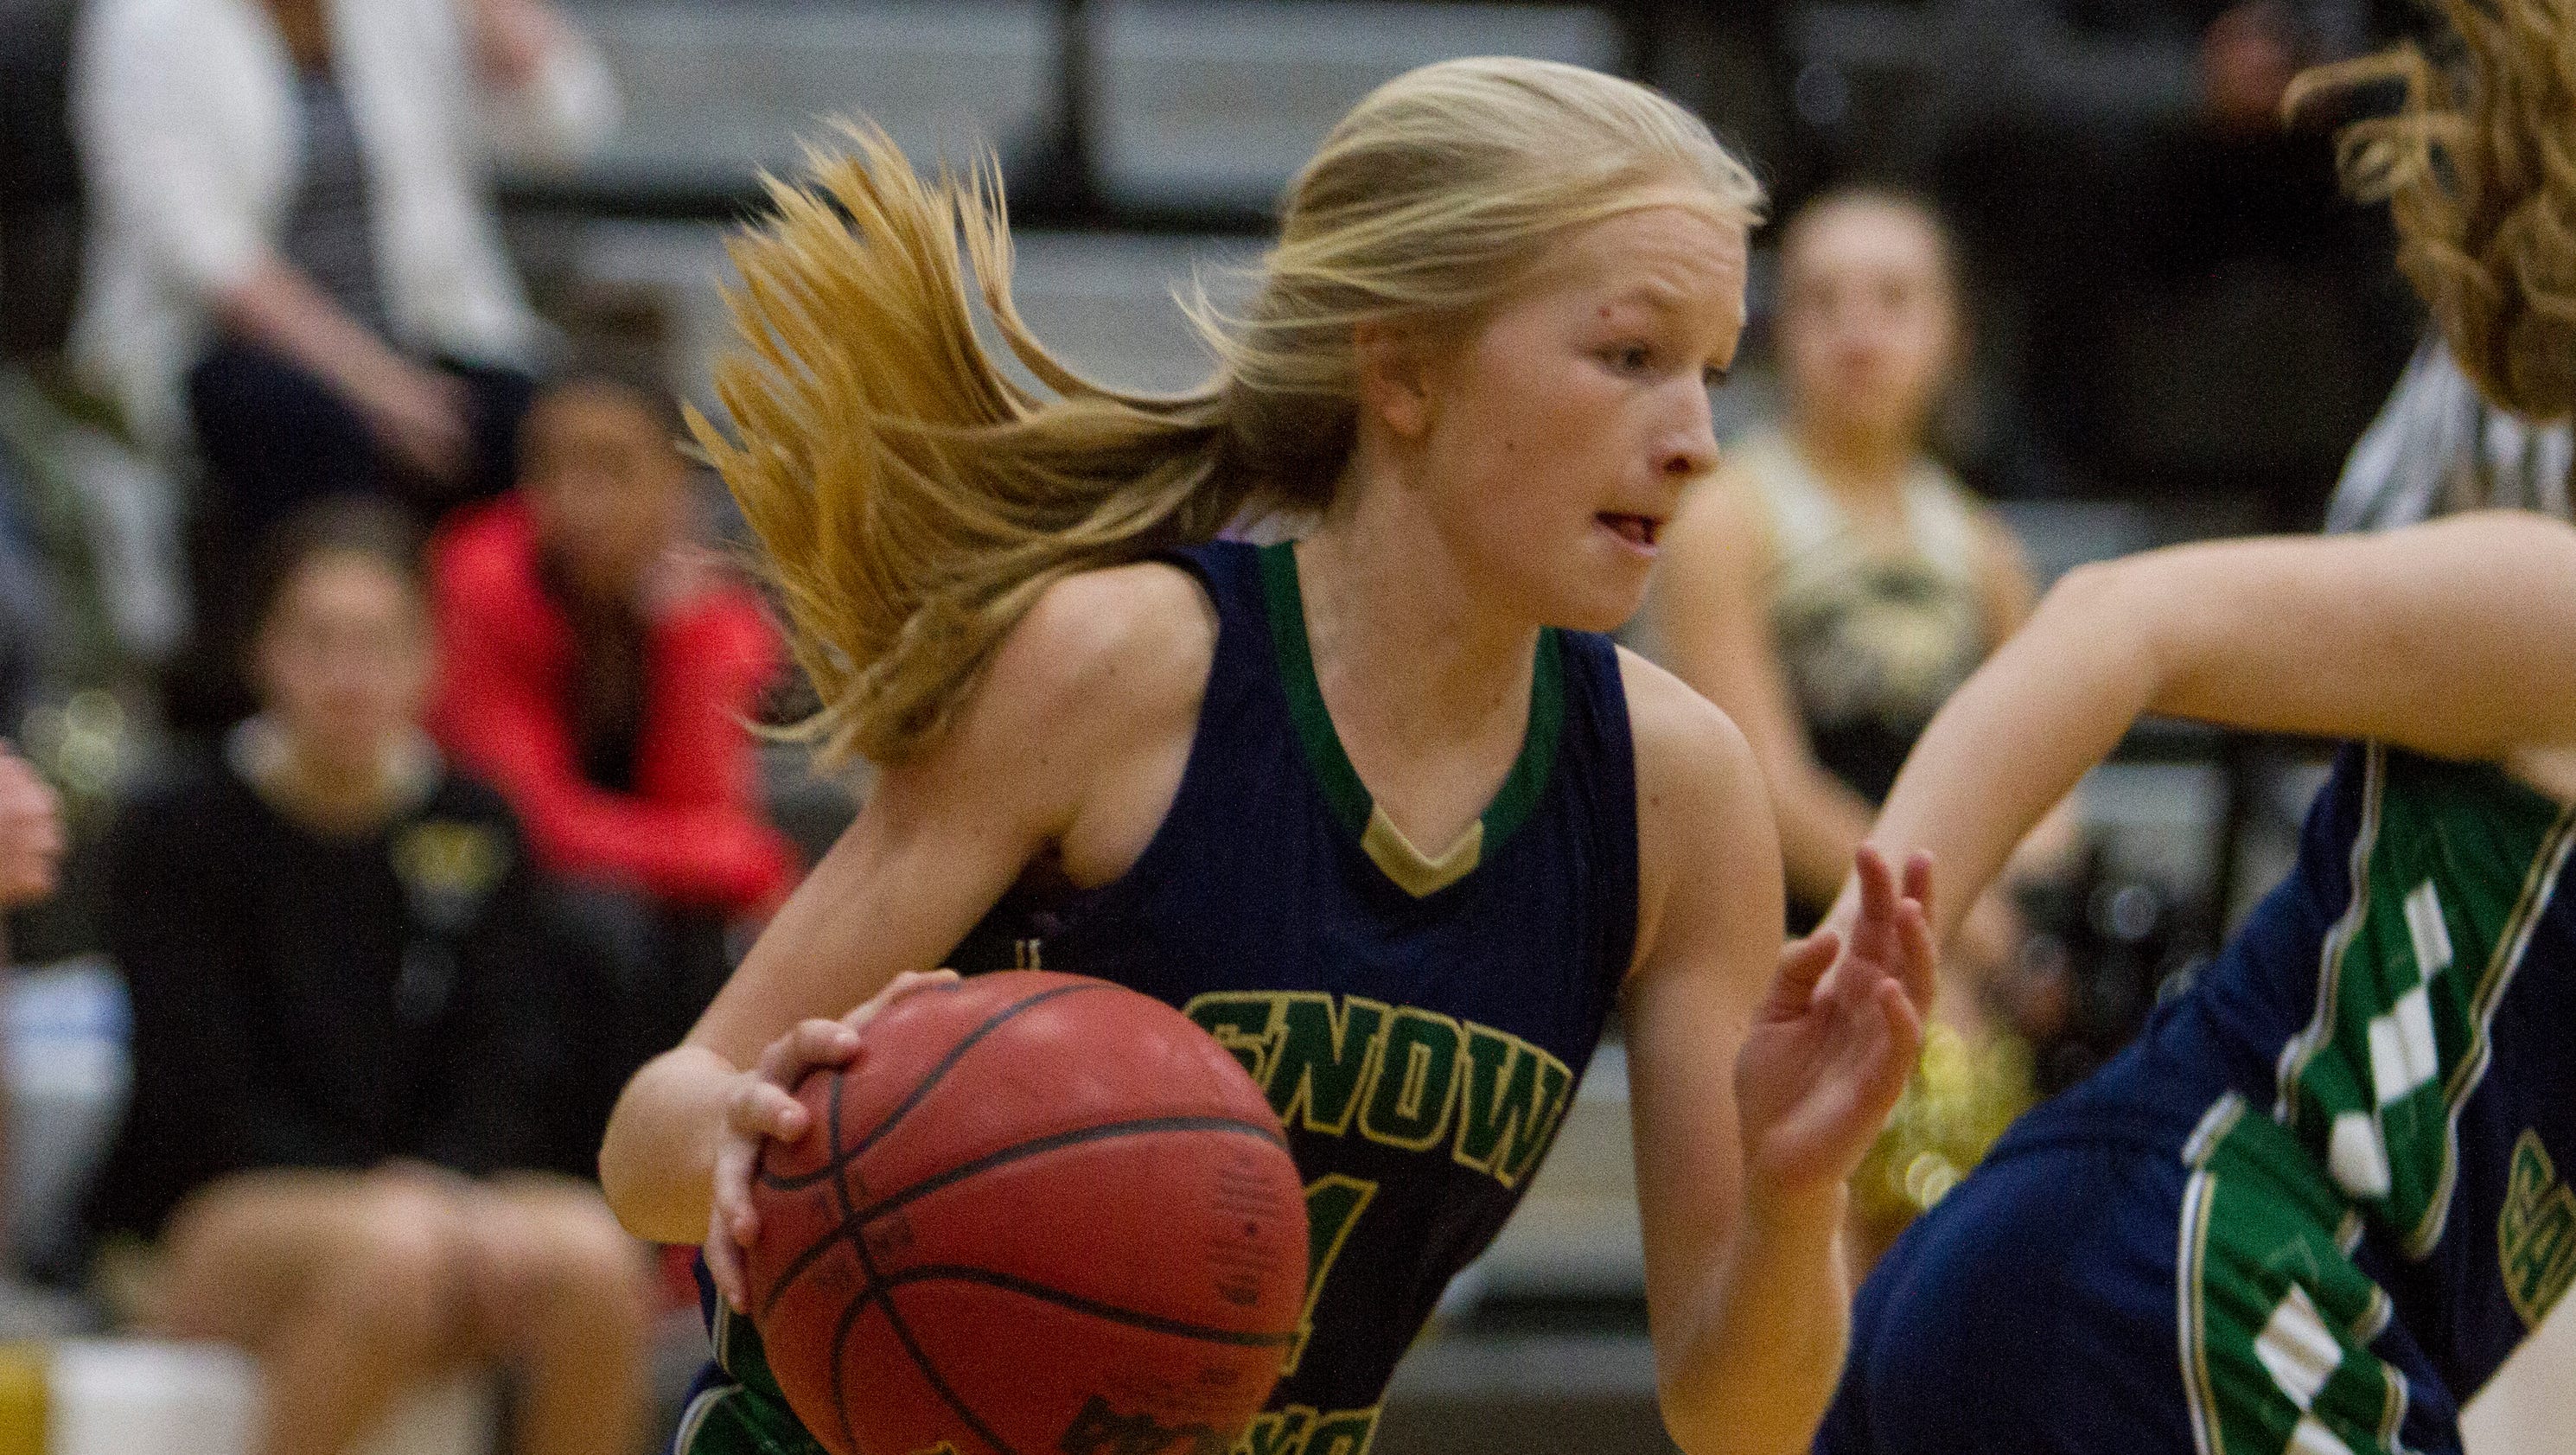 State playoffs: Snow Canyon feels 'no pressure' as defending champs - St. George Daily Spectrum